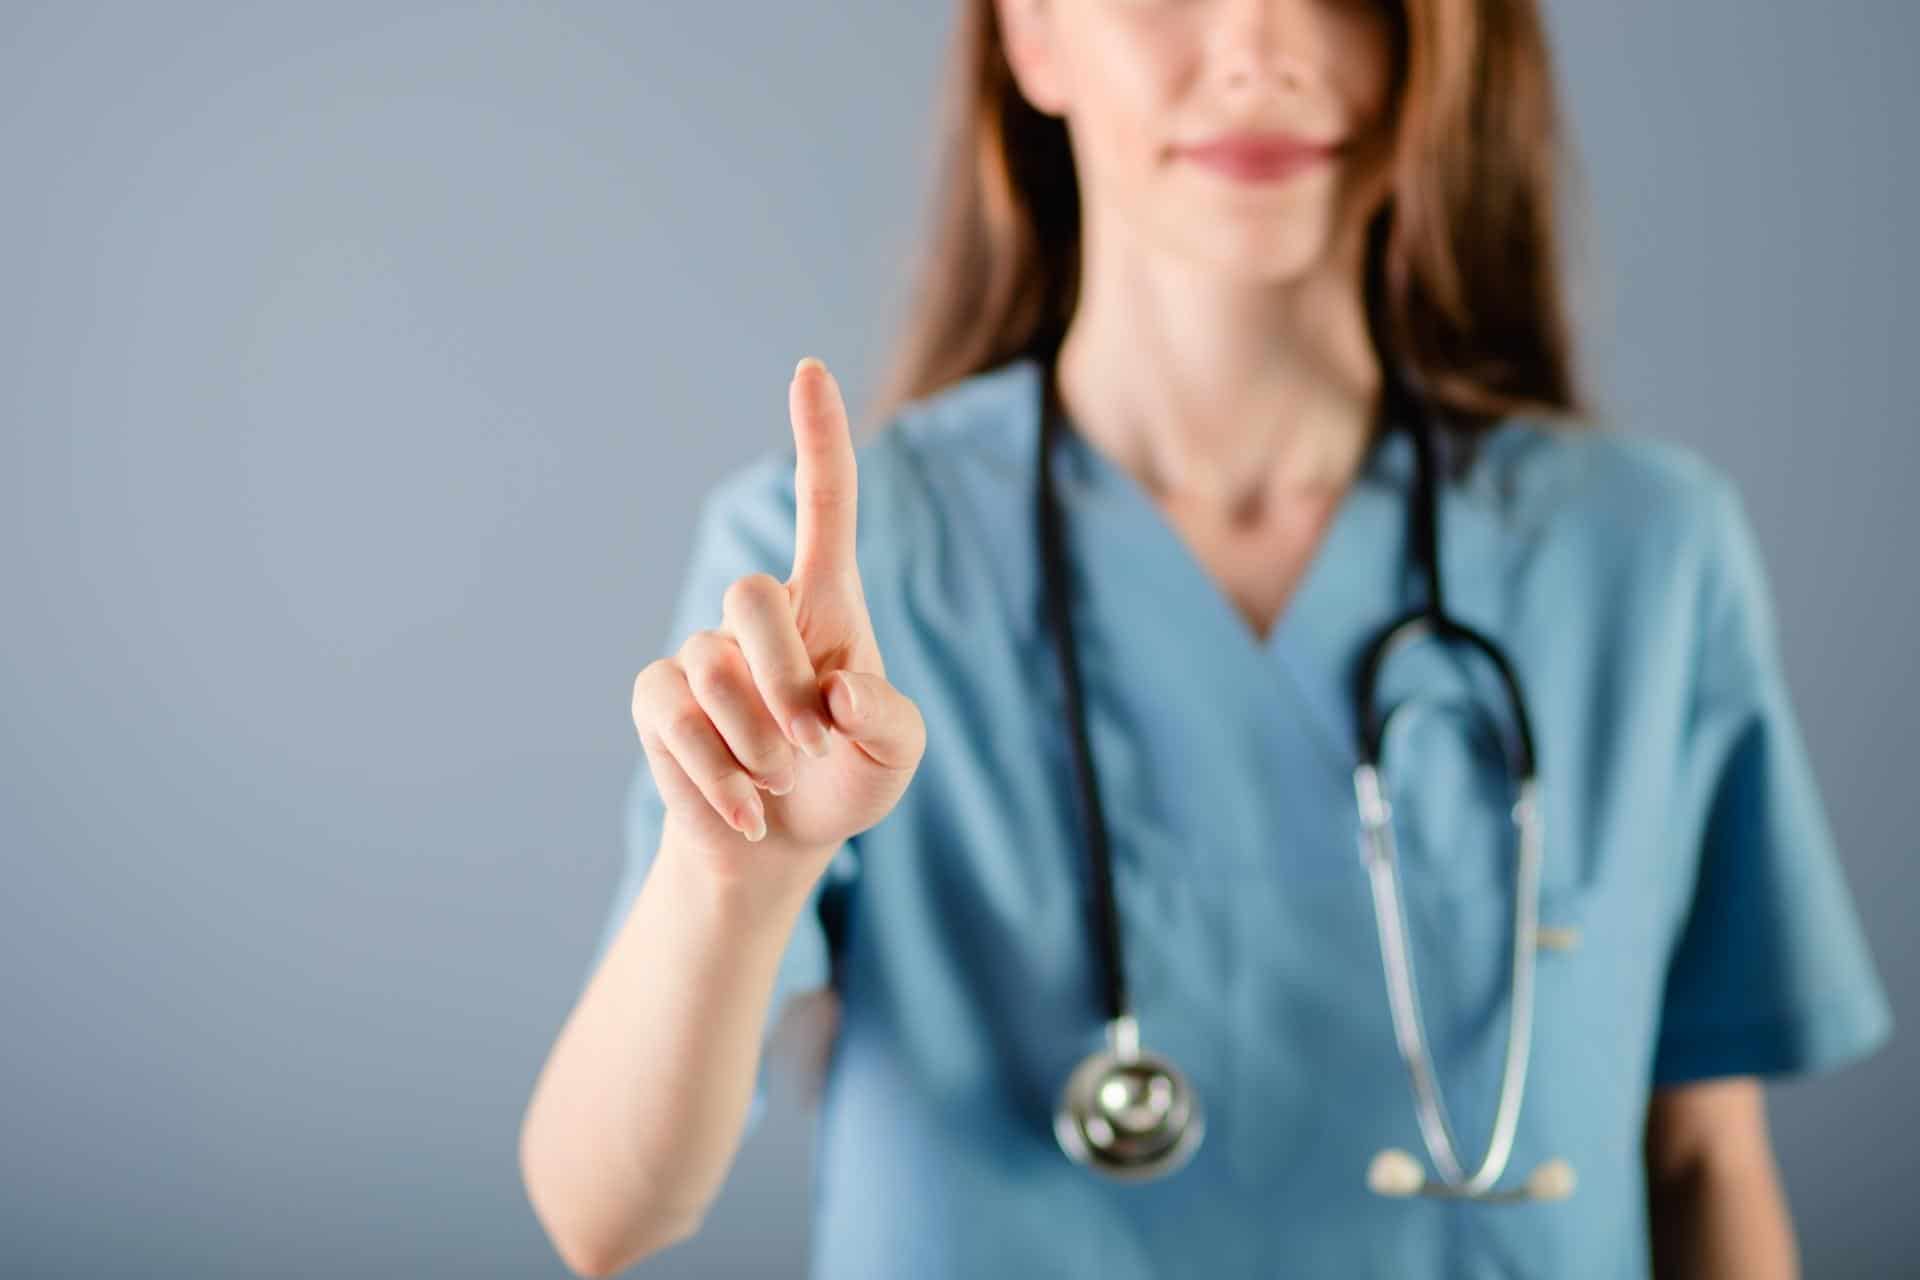 Nurse holding up index finger in a gesture that signifies helpfulness.